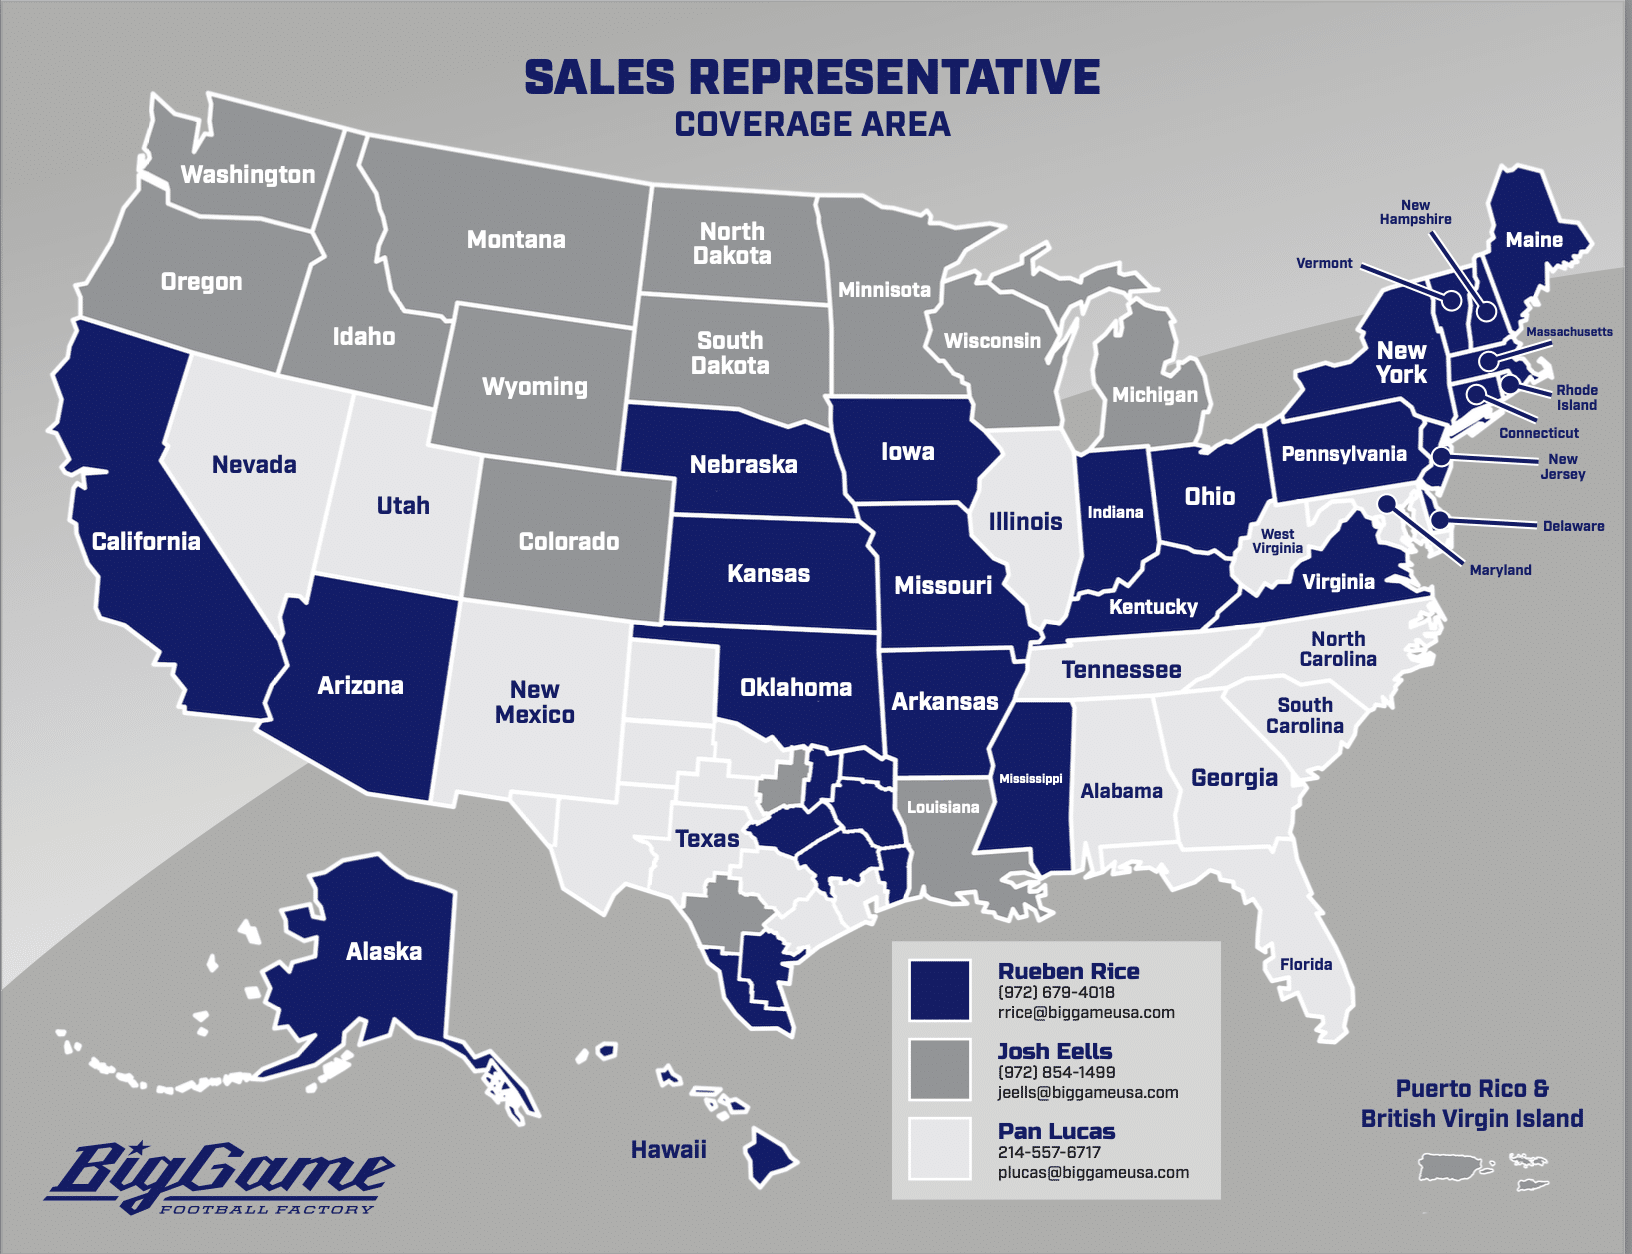 Image of map with Sales representative coverage on each state and contact information.